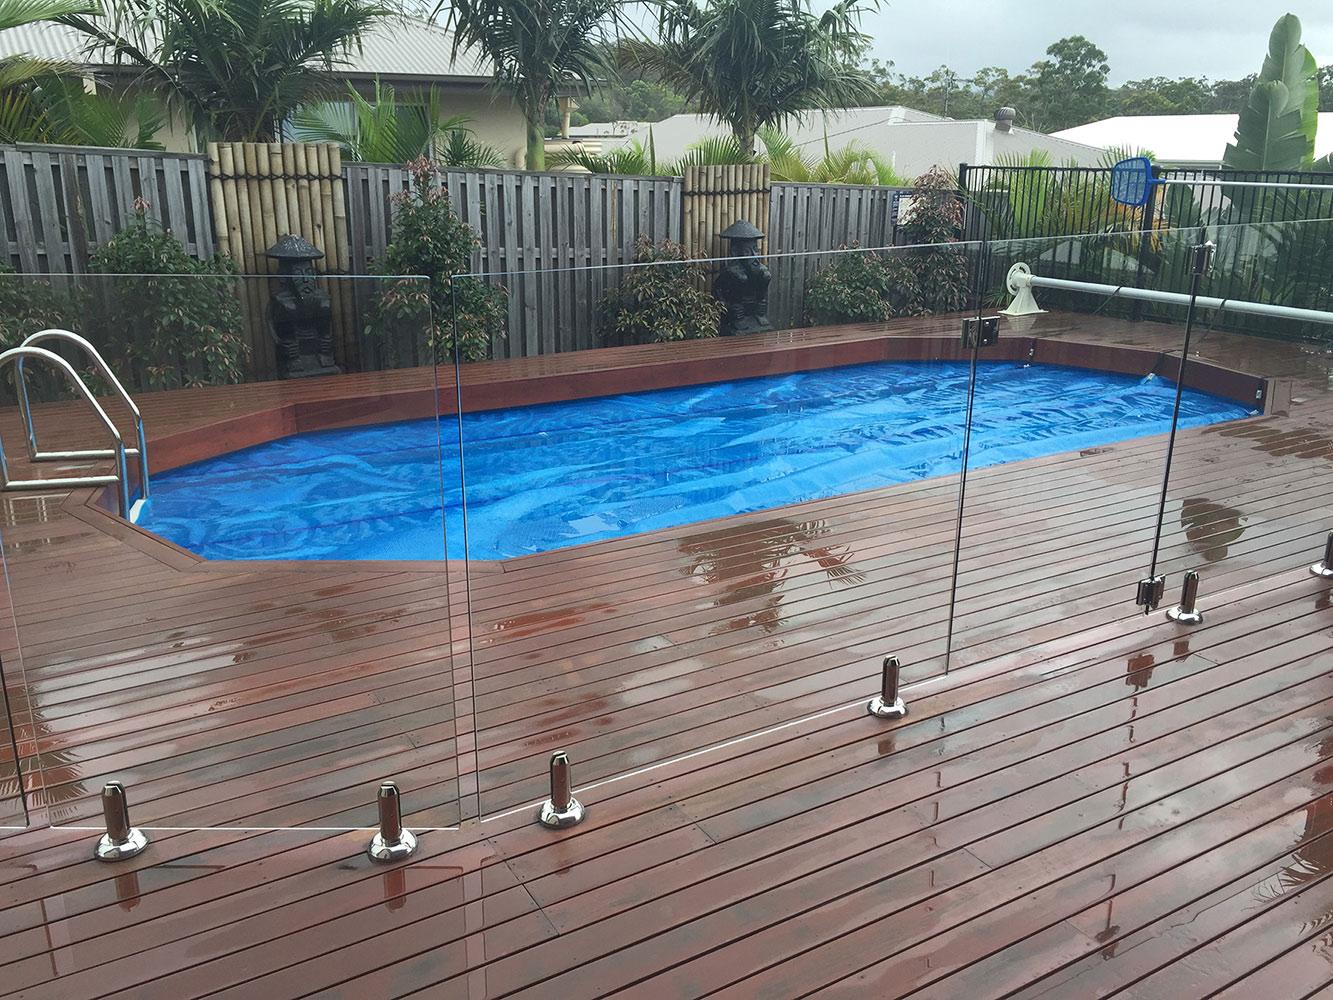  Can I build a deck around an above ground pool?